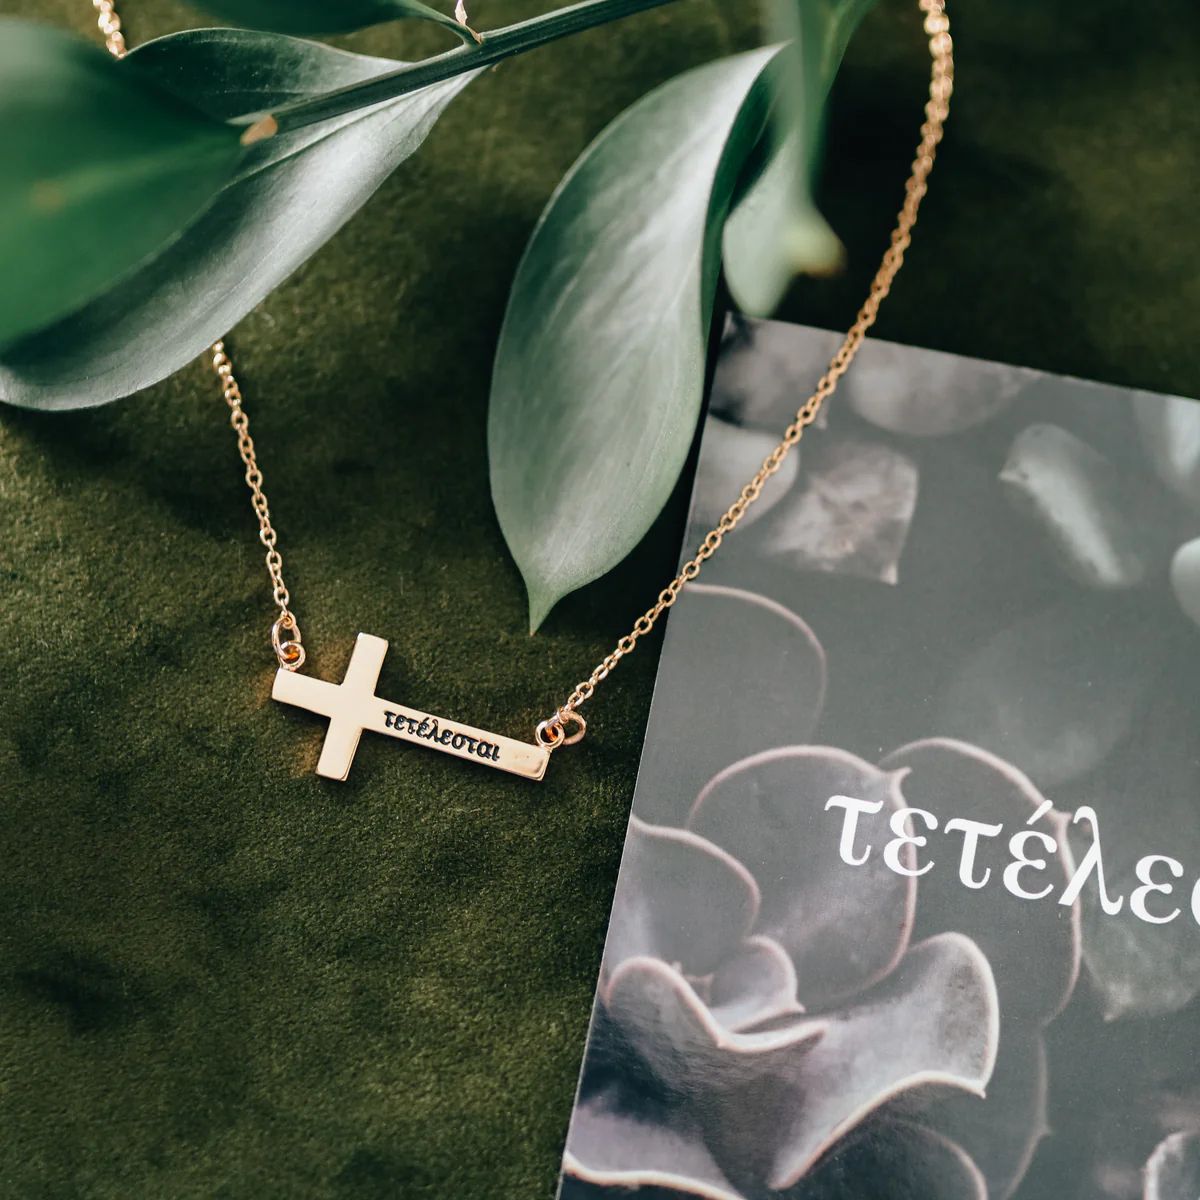 Tetelestai Necklace | The Daily Grace Co.